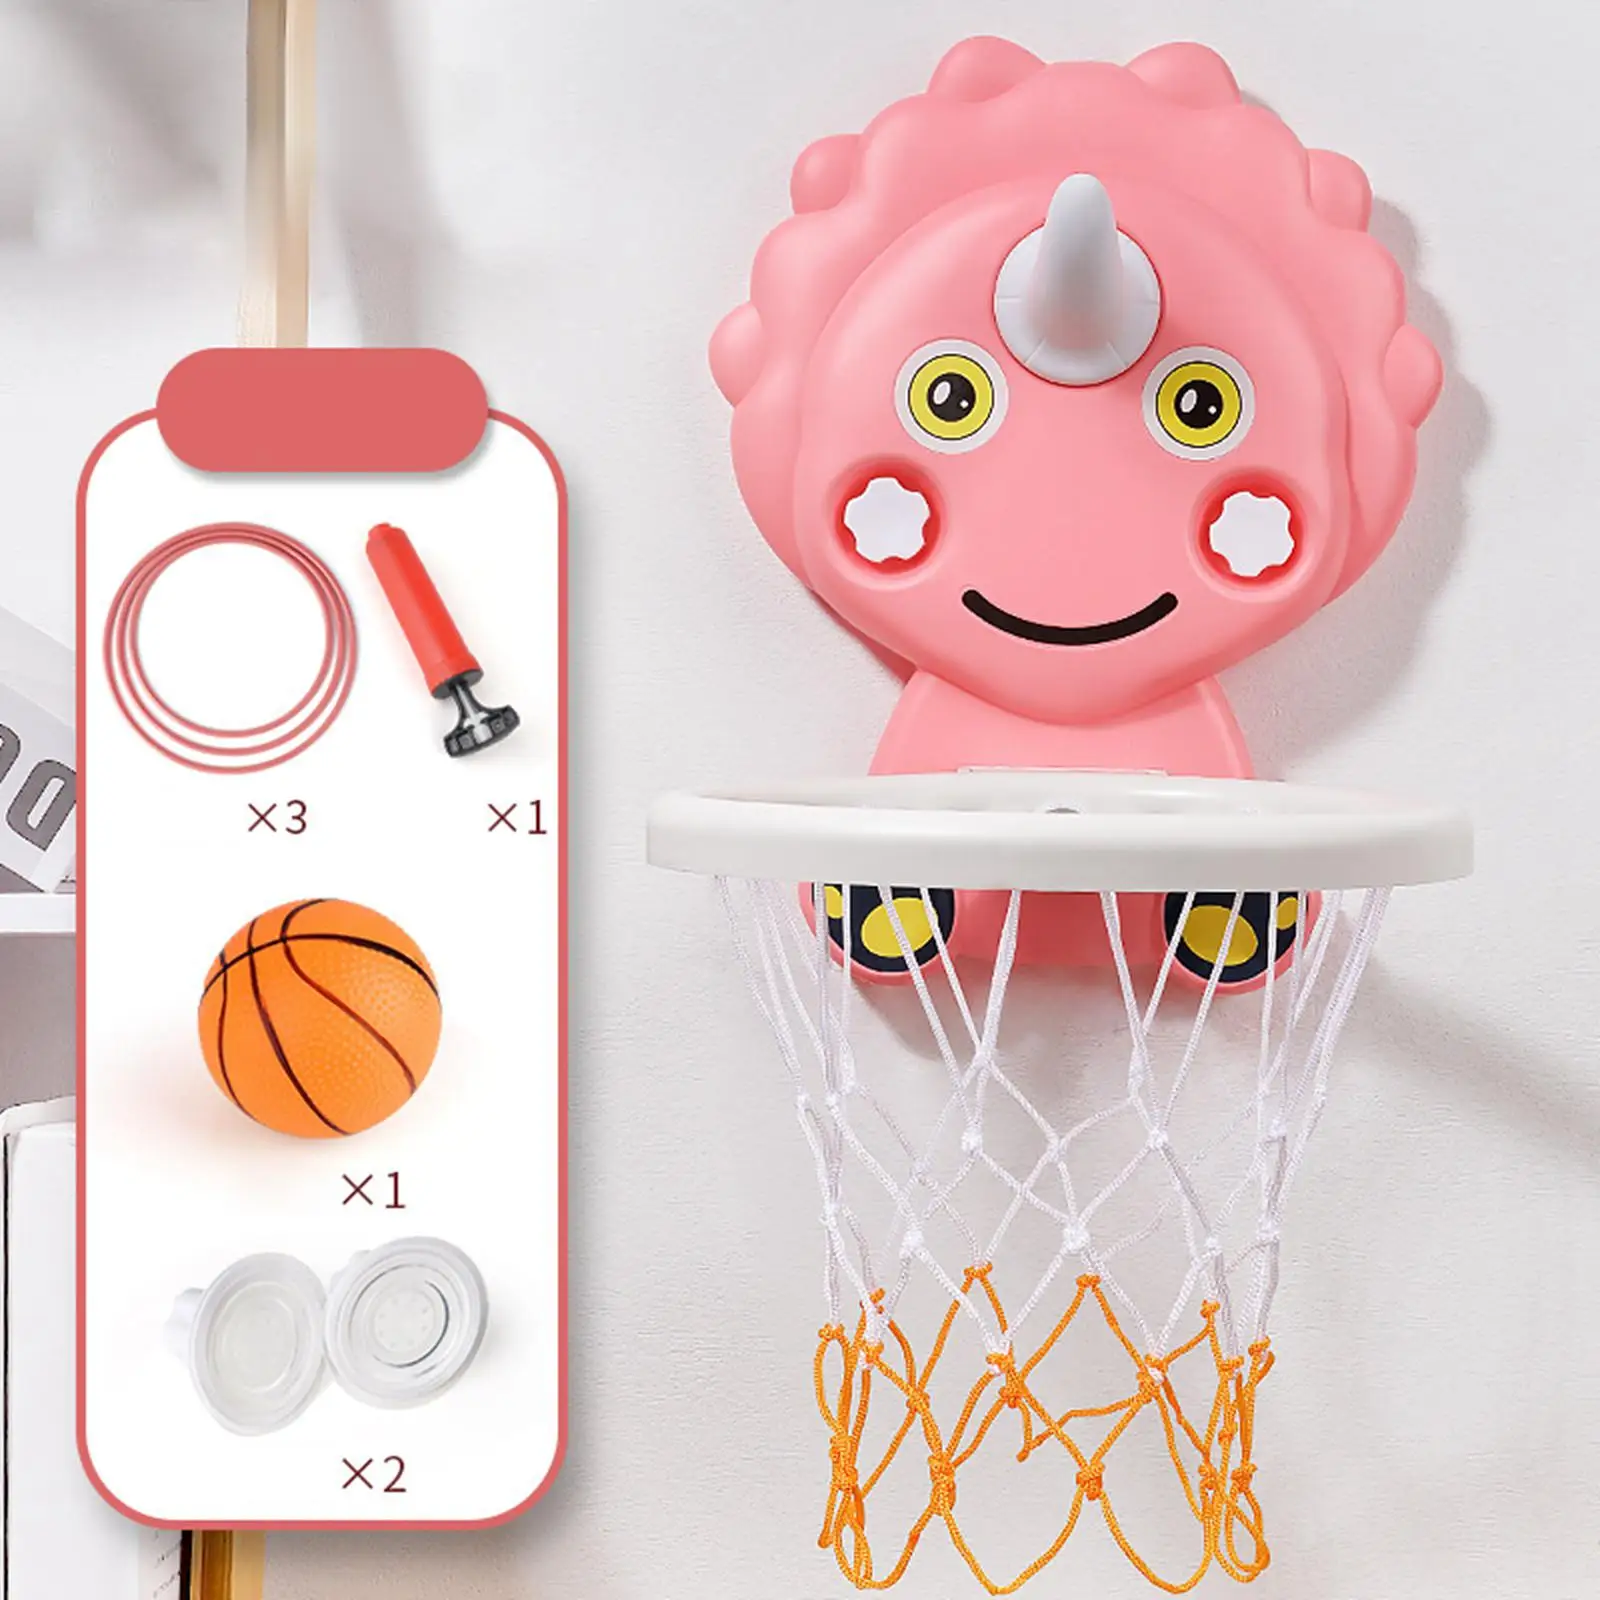 rcstronger Mini Basketball Hoop Basketball Backboard Toy with Balls for Gifts